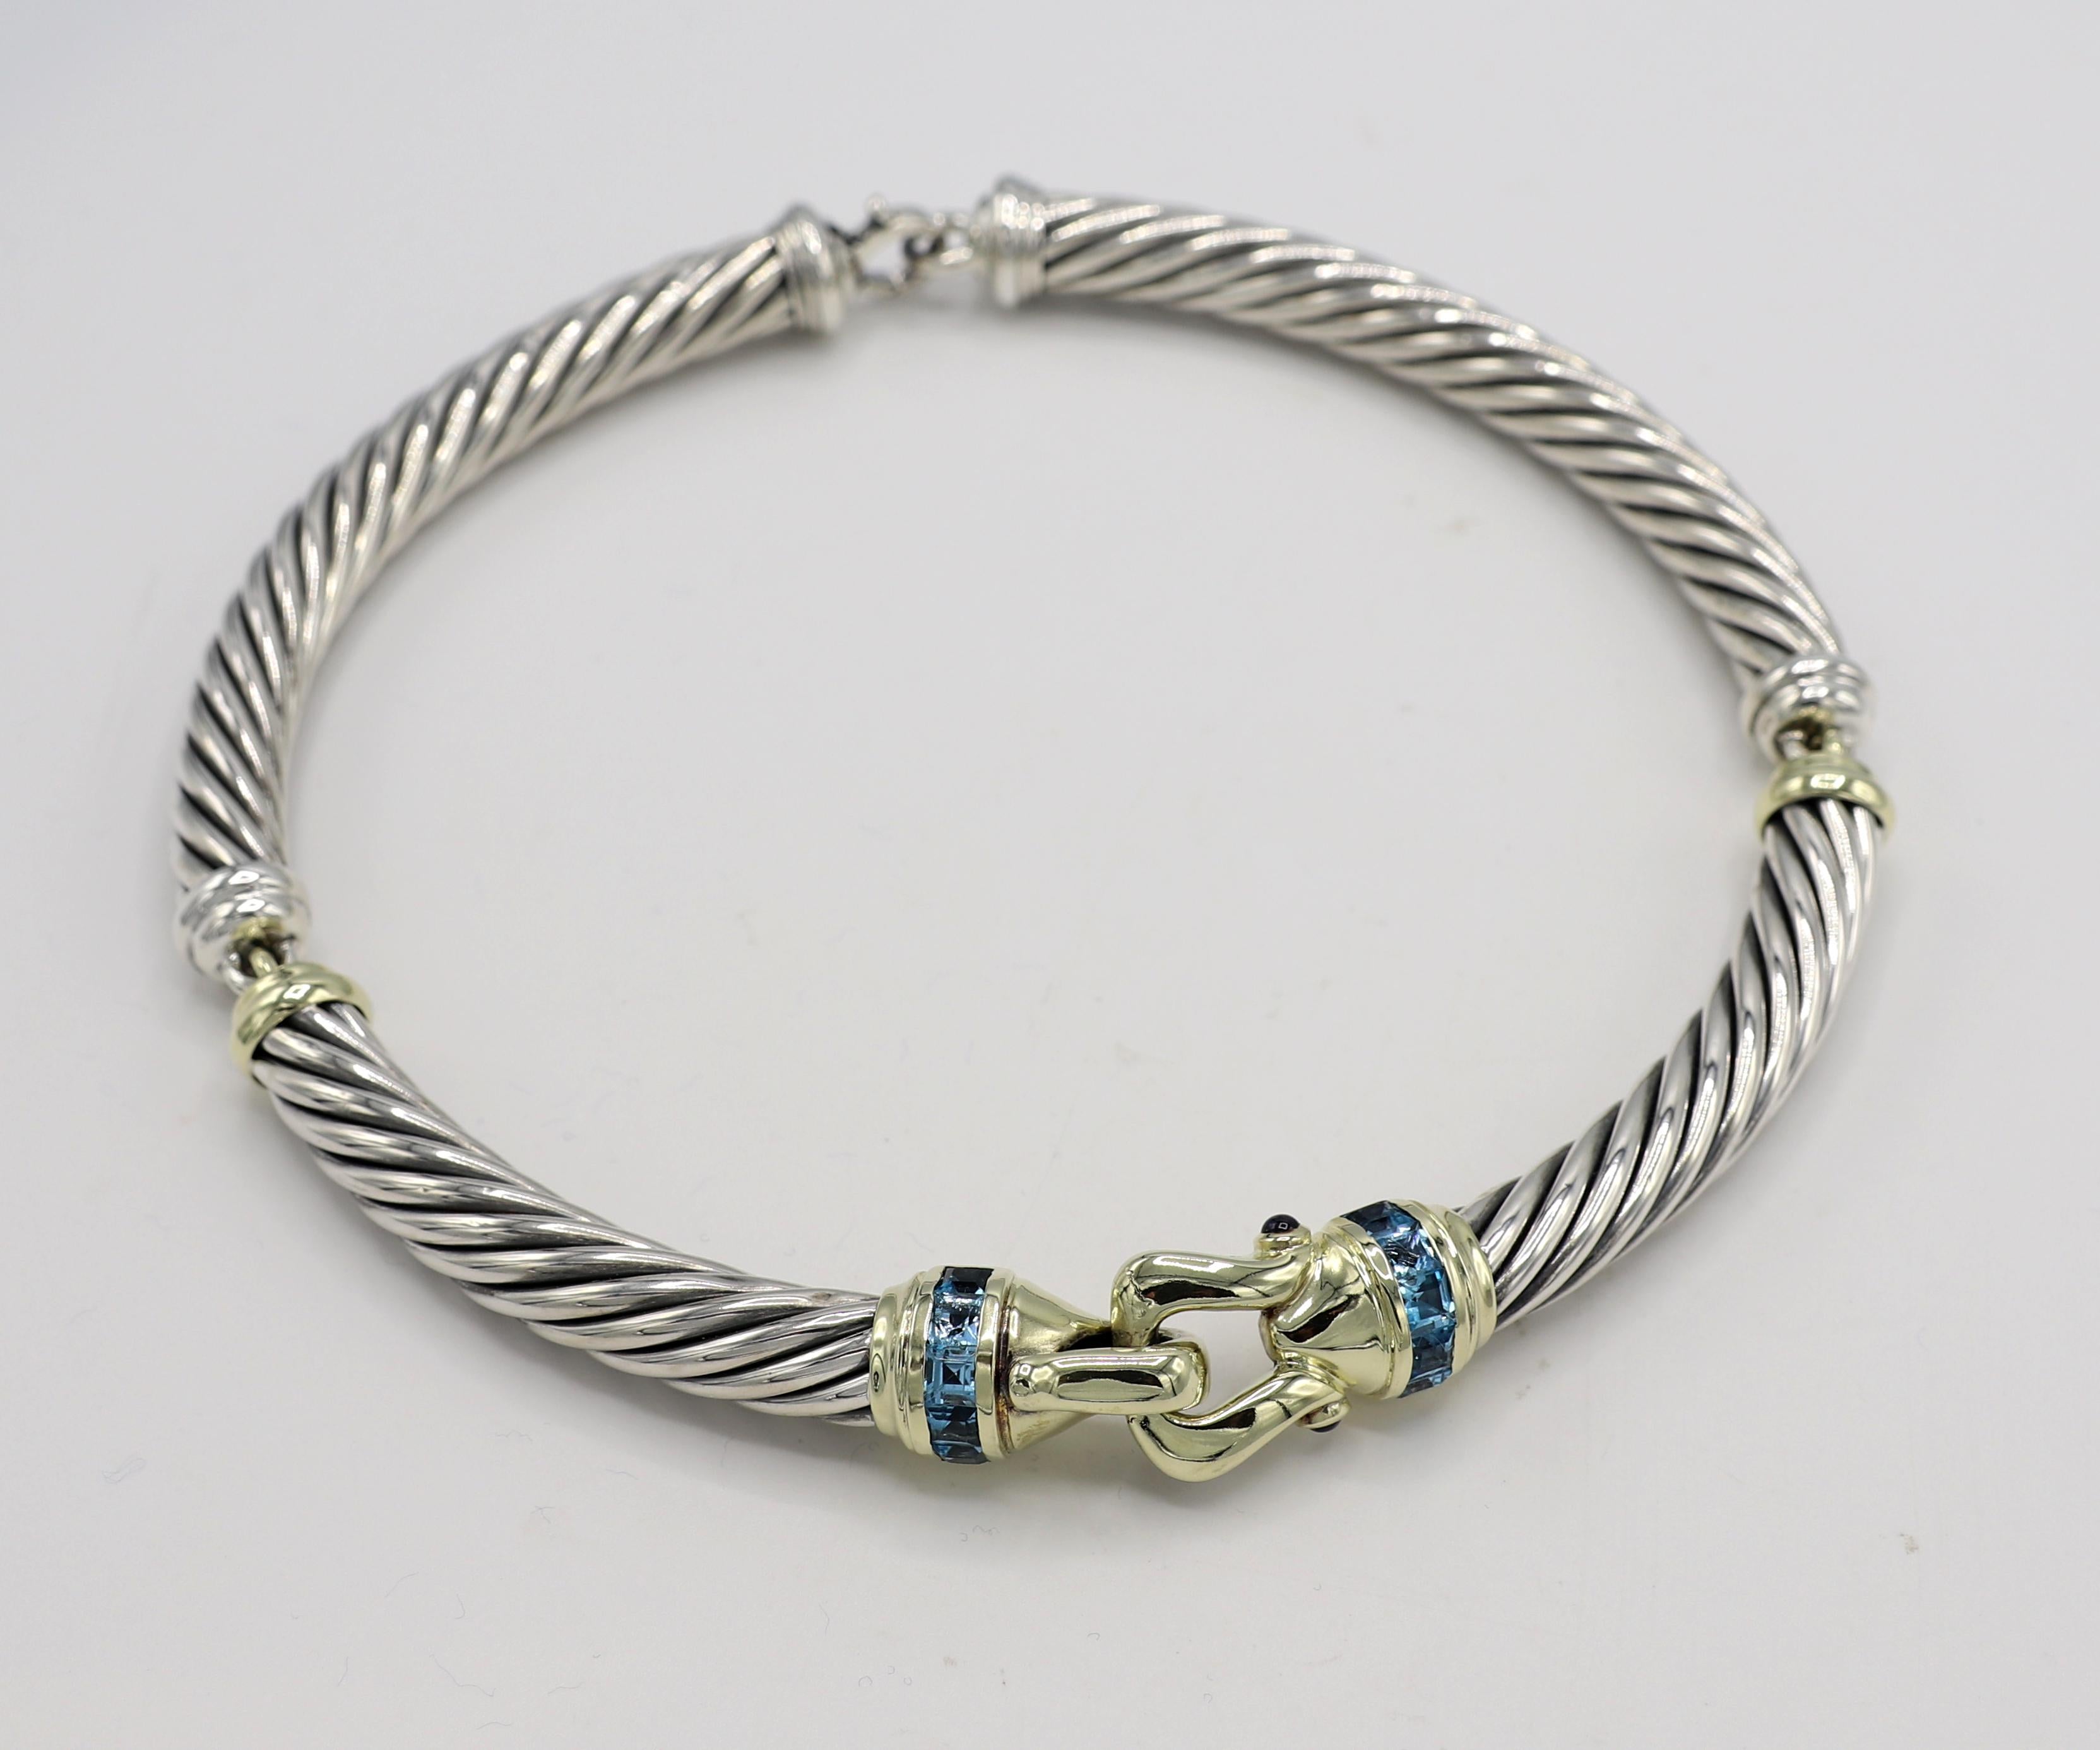 David Yurman Sterling Silver & Gold Cable Blue Topaz & Iolite Buckle Choker Necklace 
Metal: Sterling silver & 14k yellow gold
Weight: 71.3 grams
Width: 9.5mm
Length: 16 inches

